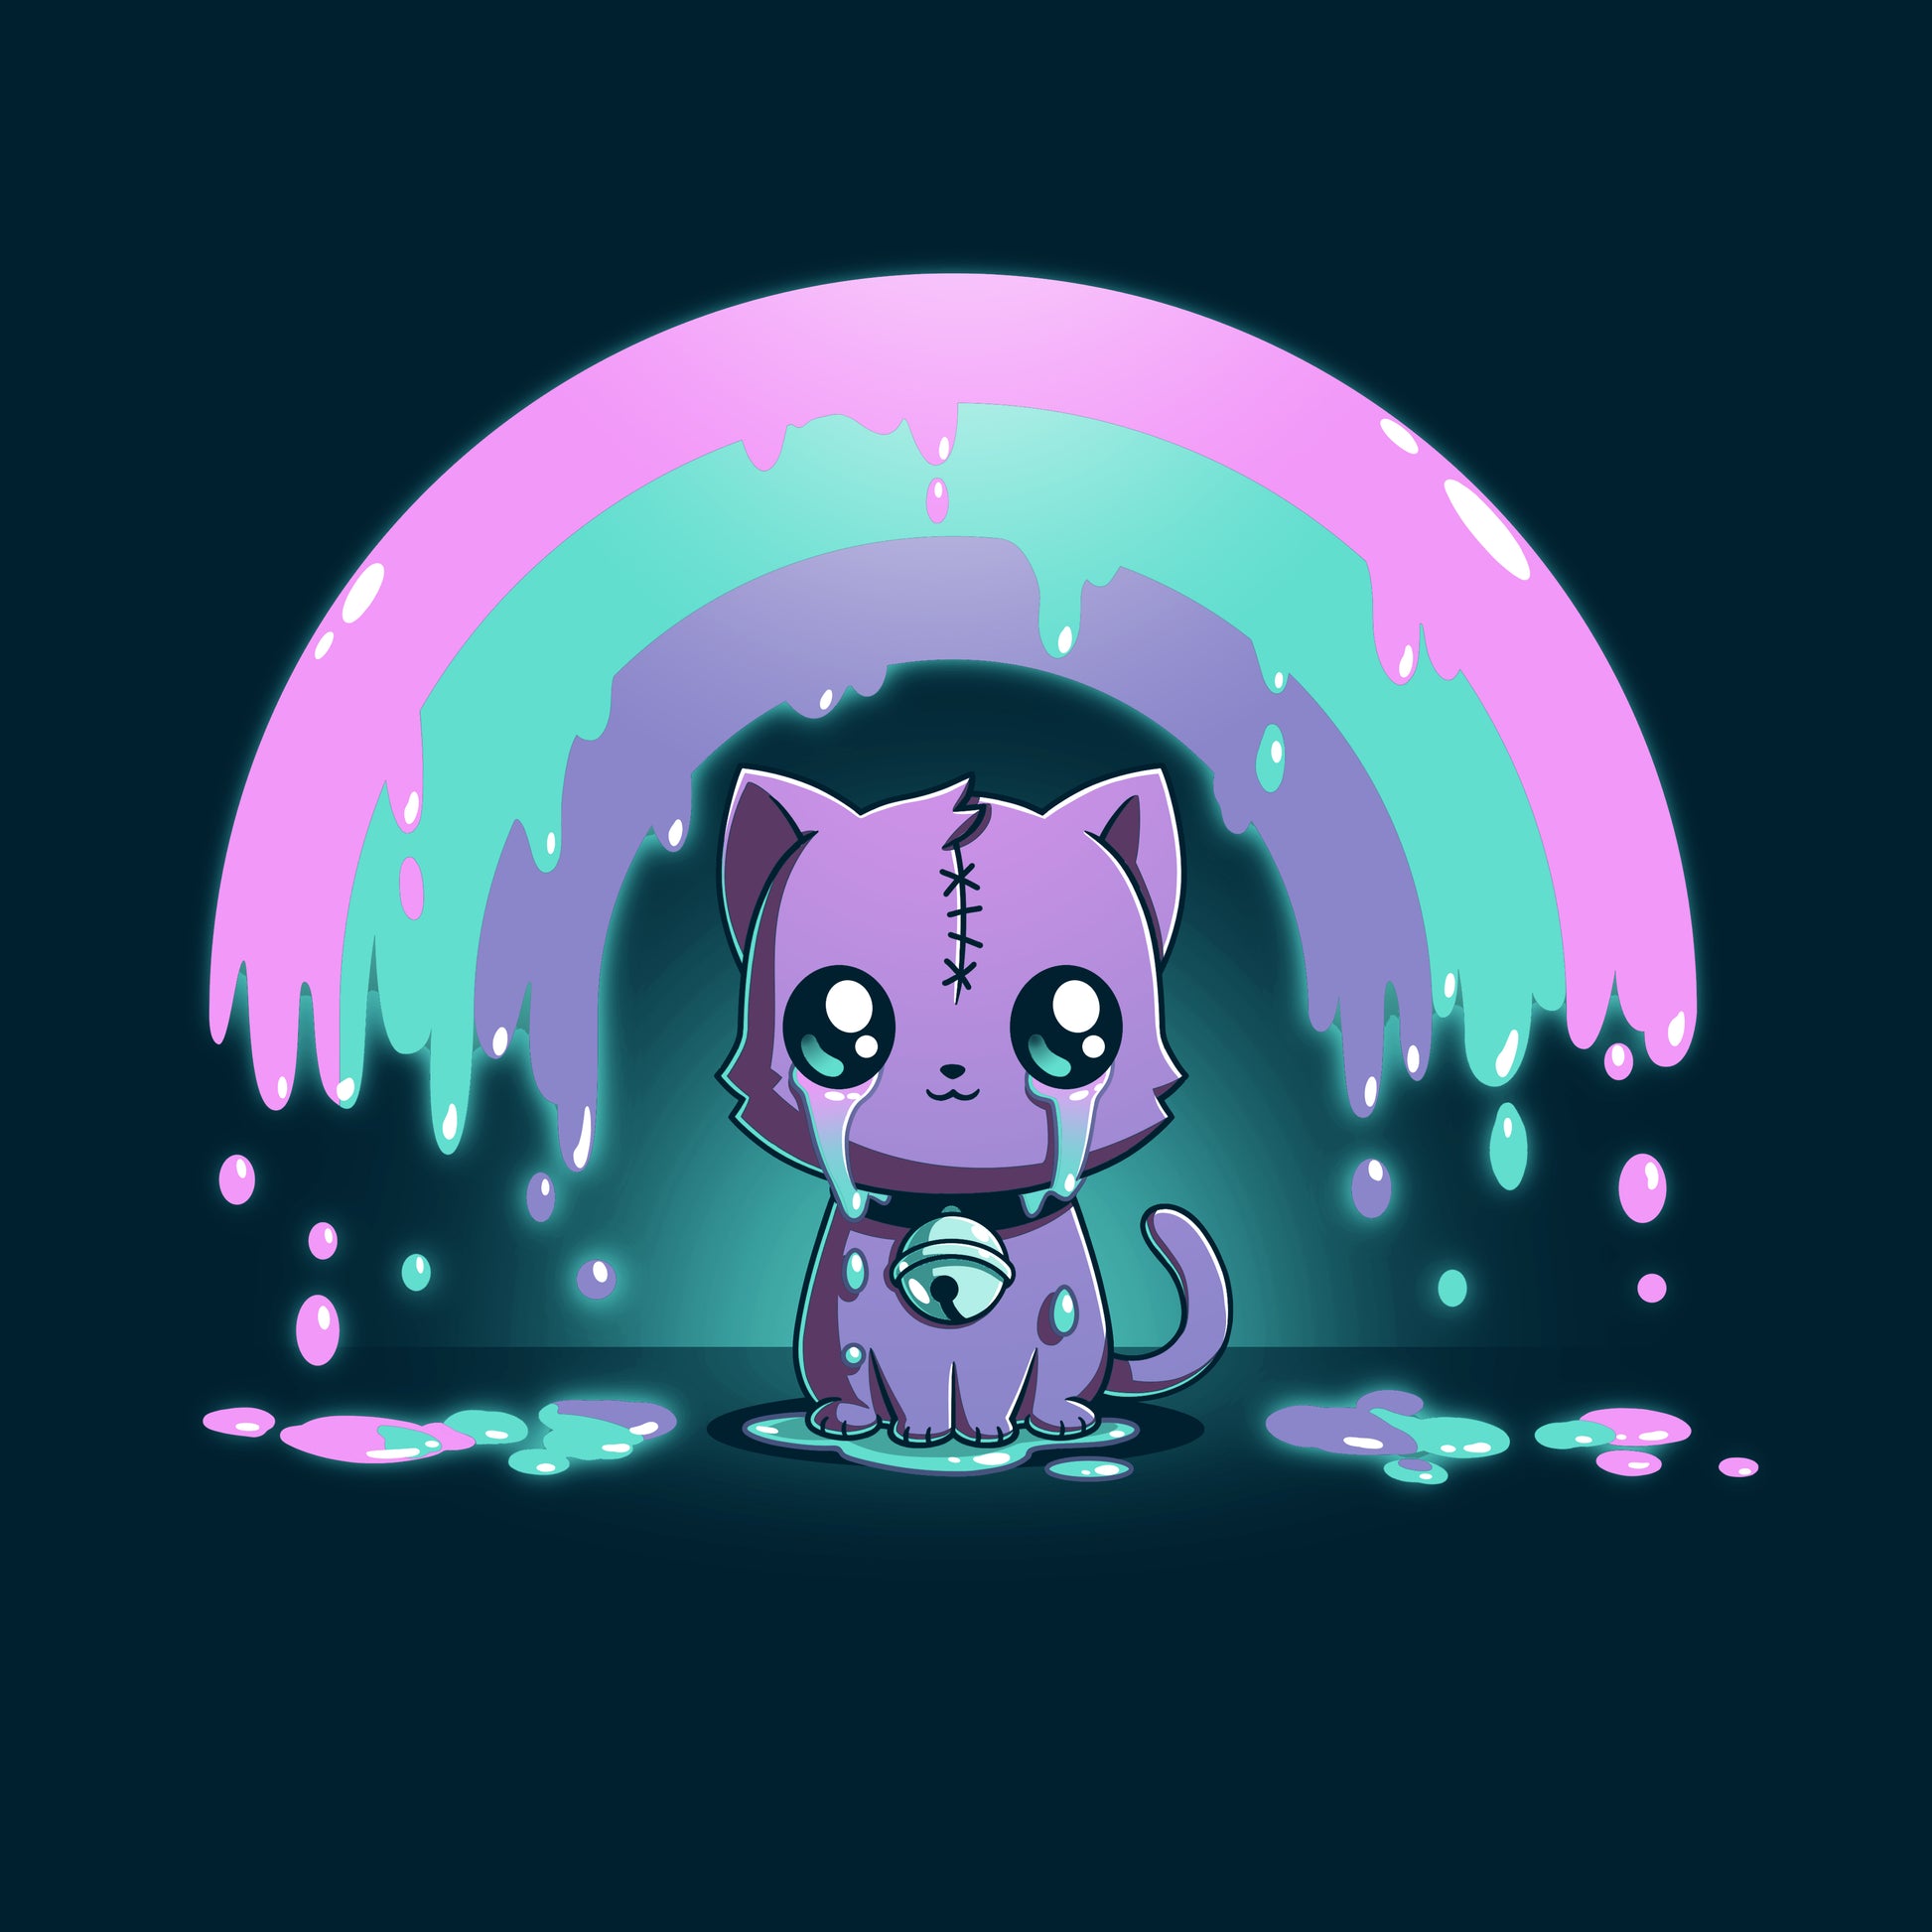 Illustration of a cute purple cat with large eyes and a stitched forehead, sitting under a dripping pink and green rainbow on a dark background. Perfect for a kawaii tee, this Rainbow Crying Cat design by monsterdigital brings whimsical charm to any unisex t-shirt made from super soft cotton.